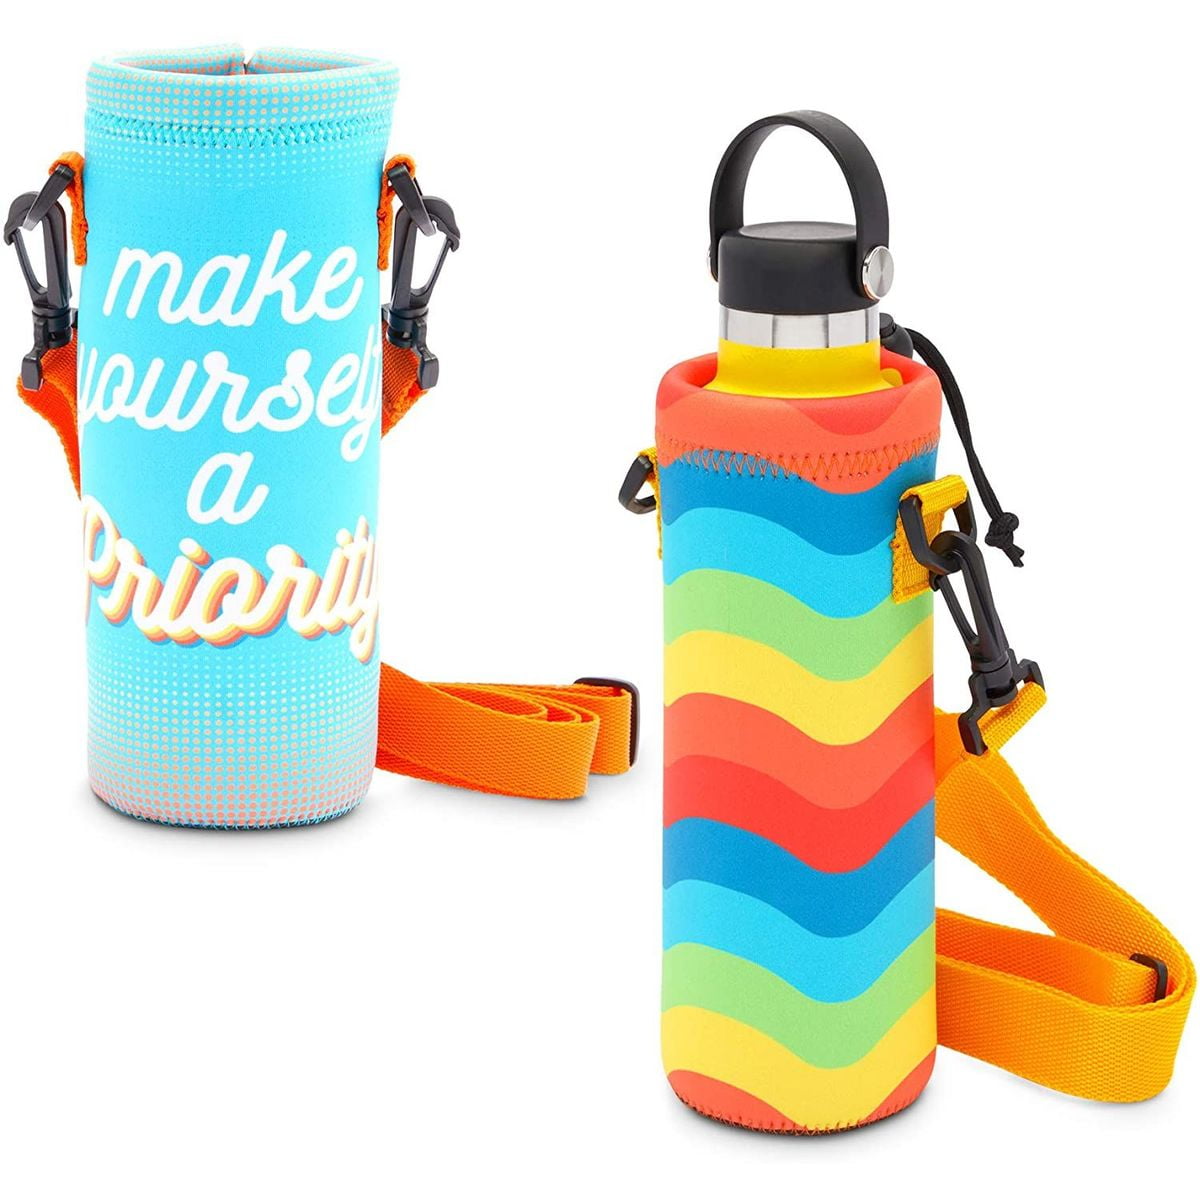 Soft Water Bottle Bag Carrier Case Cover Sleeve Protector For Activities D 